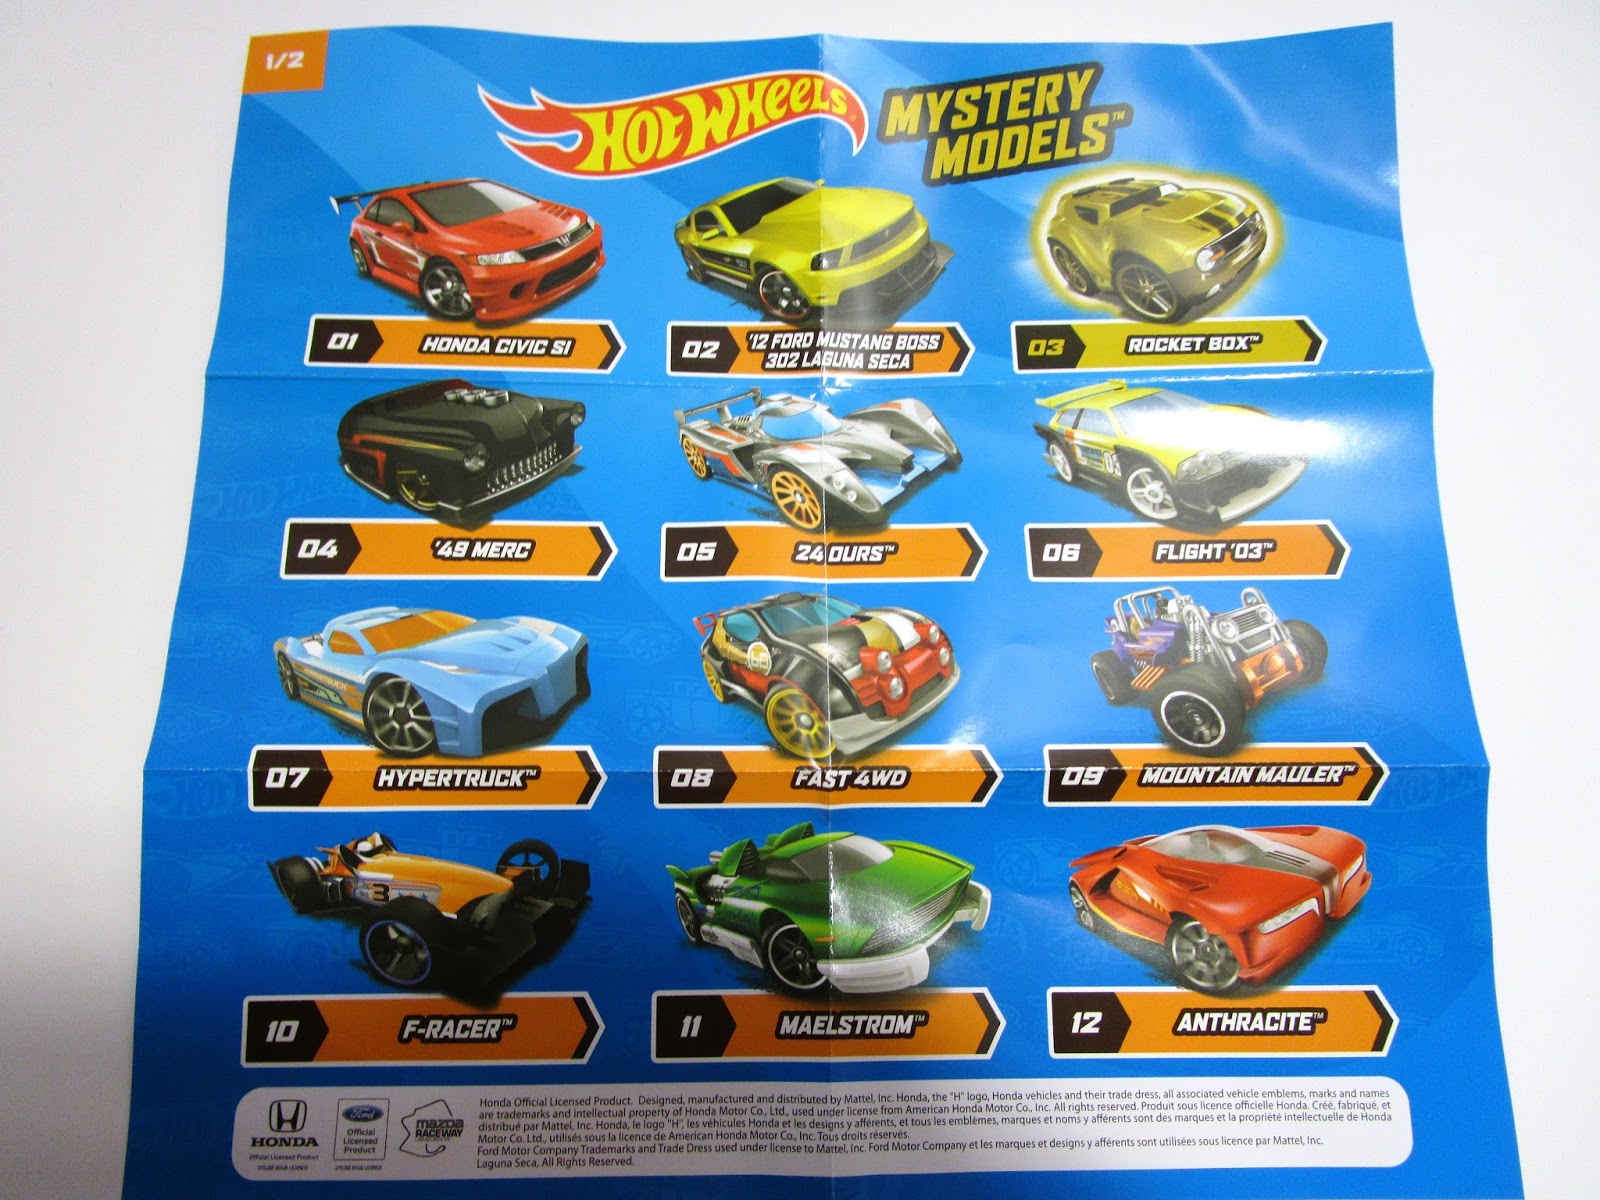 Brand New Hot Wheels Mystery Models Foil Packs have Arrived! All